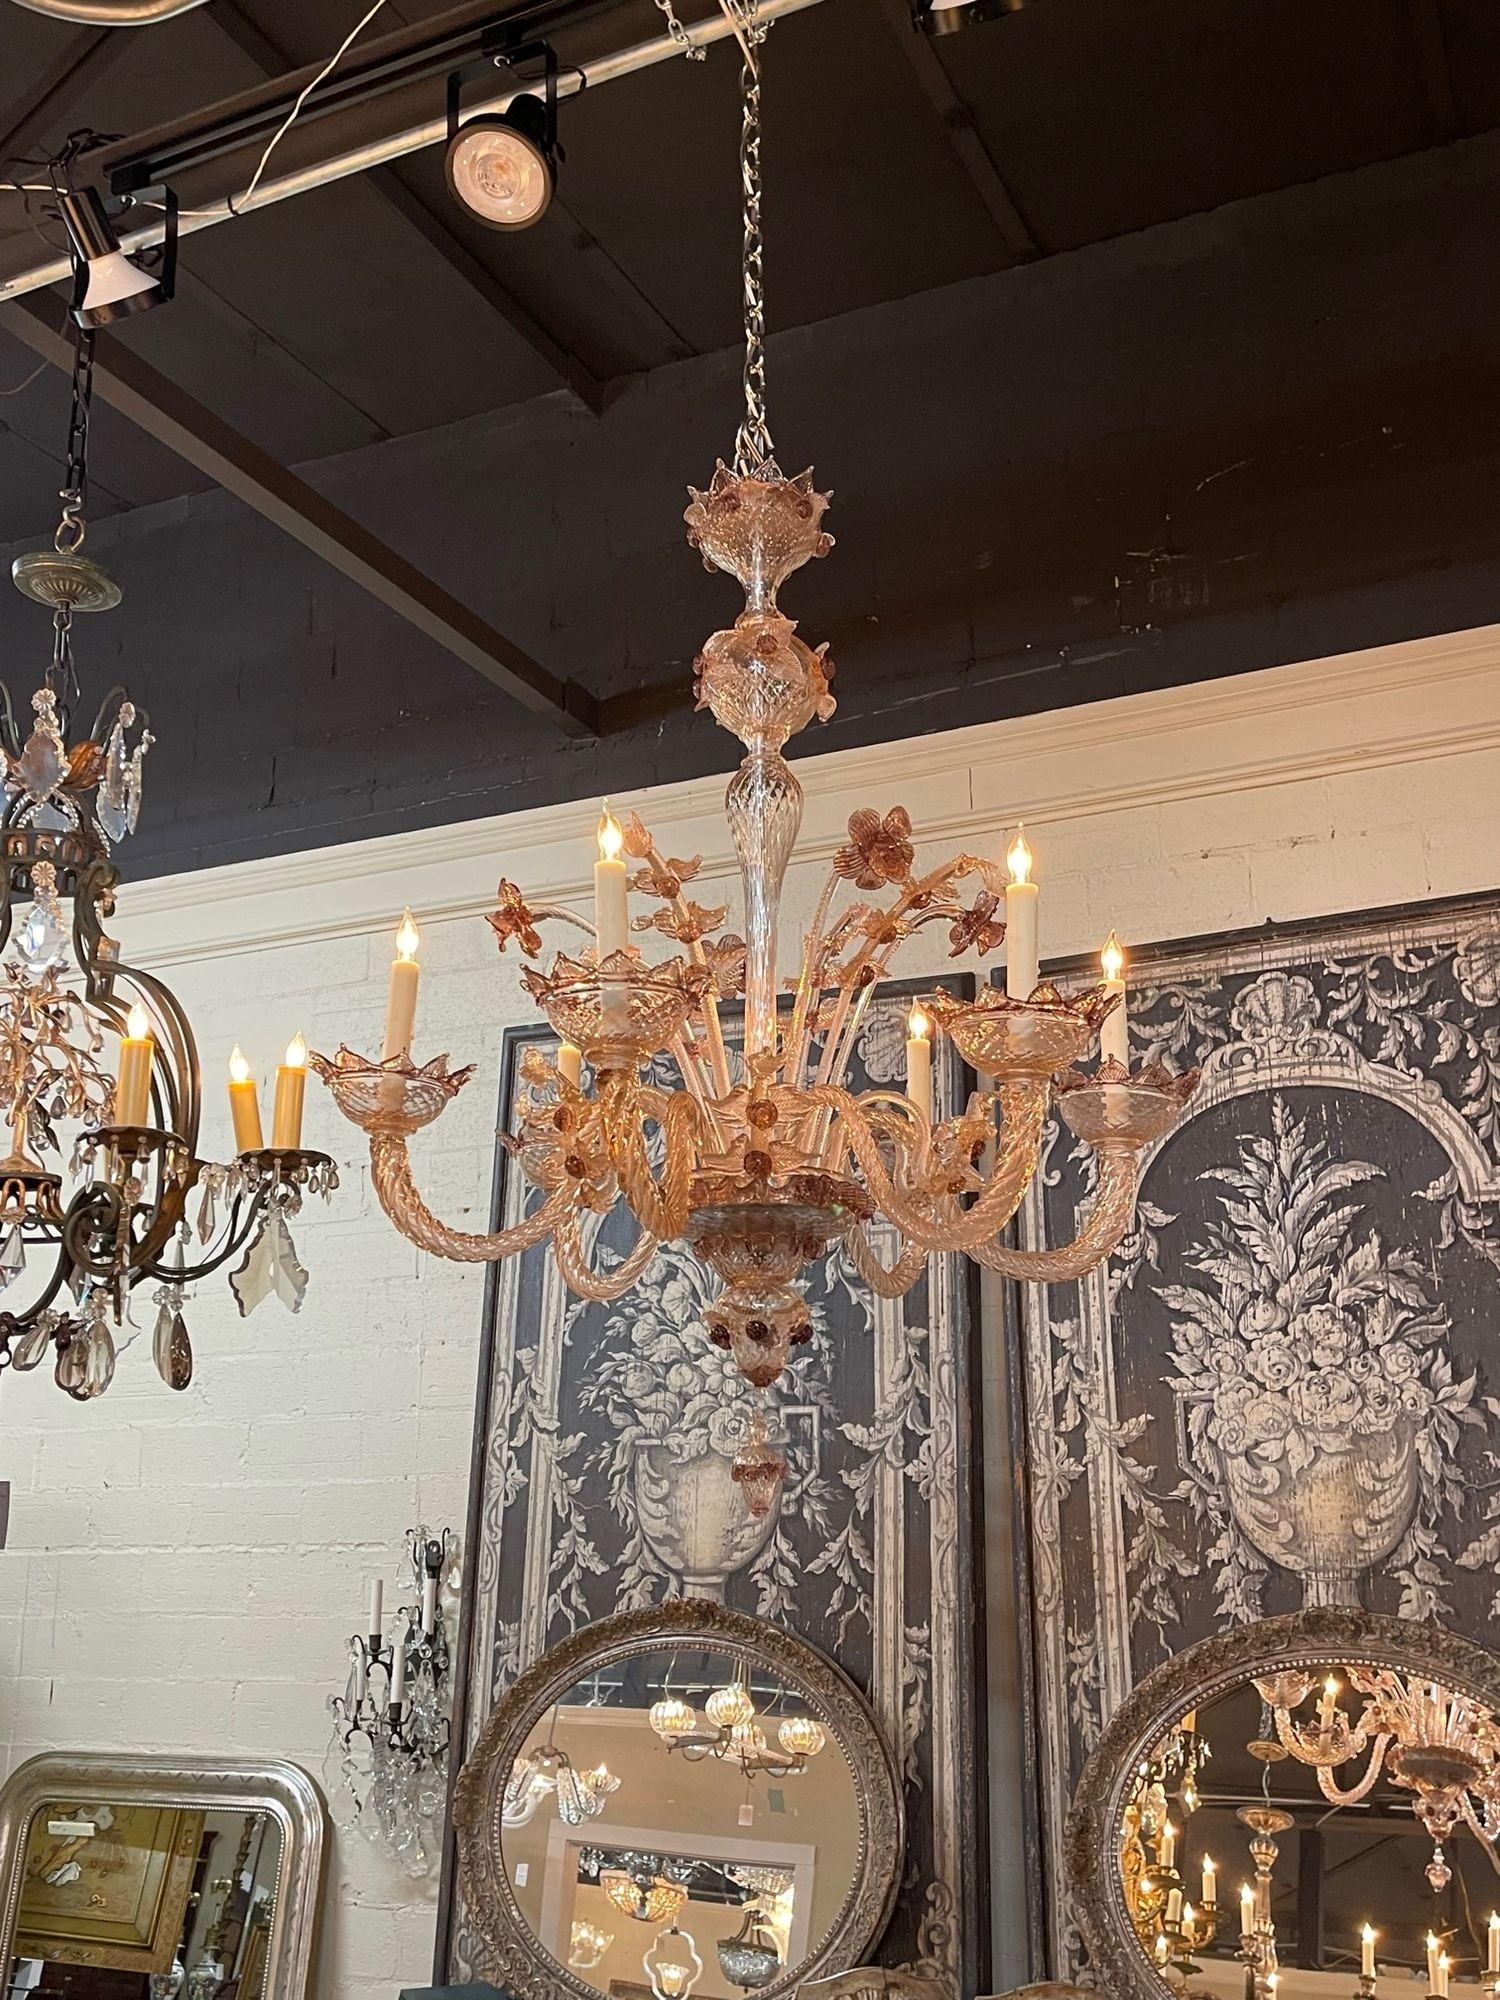 Gorgeous antique lavendar venetian chandelier with 6 lights. Featuring beautiful textured glass and floral details. Stunning!!